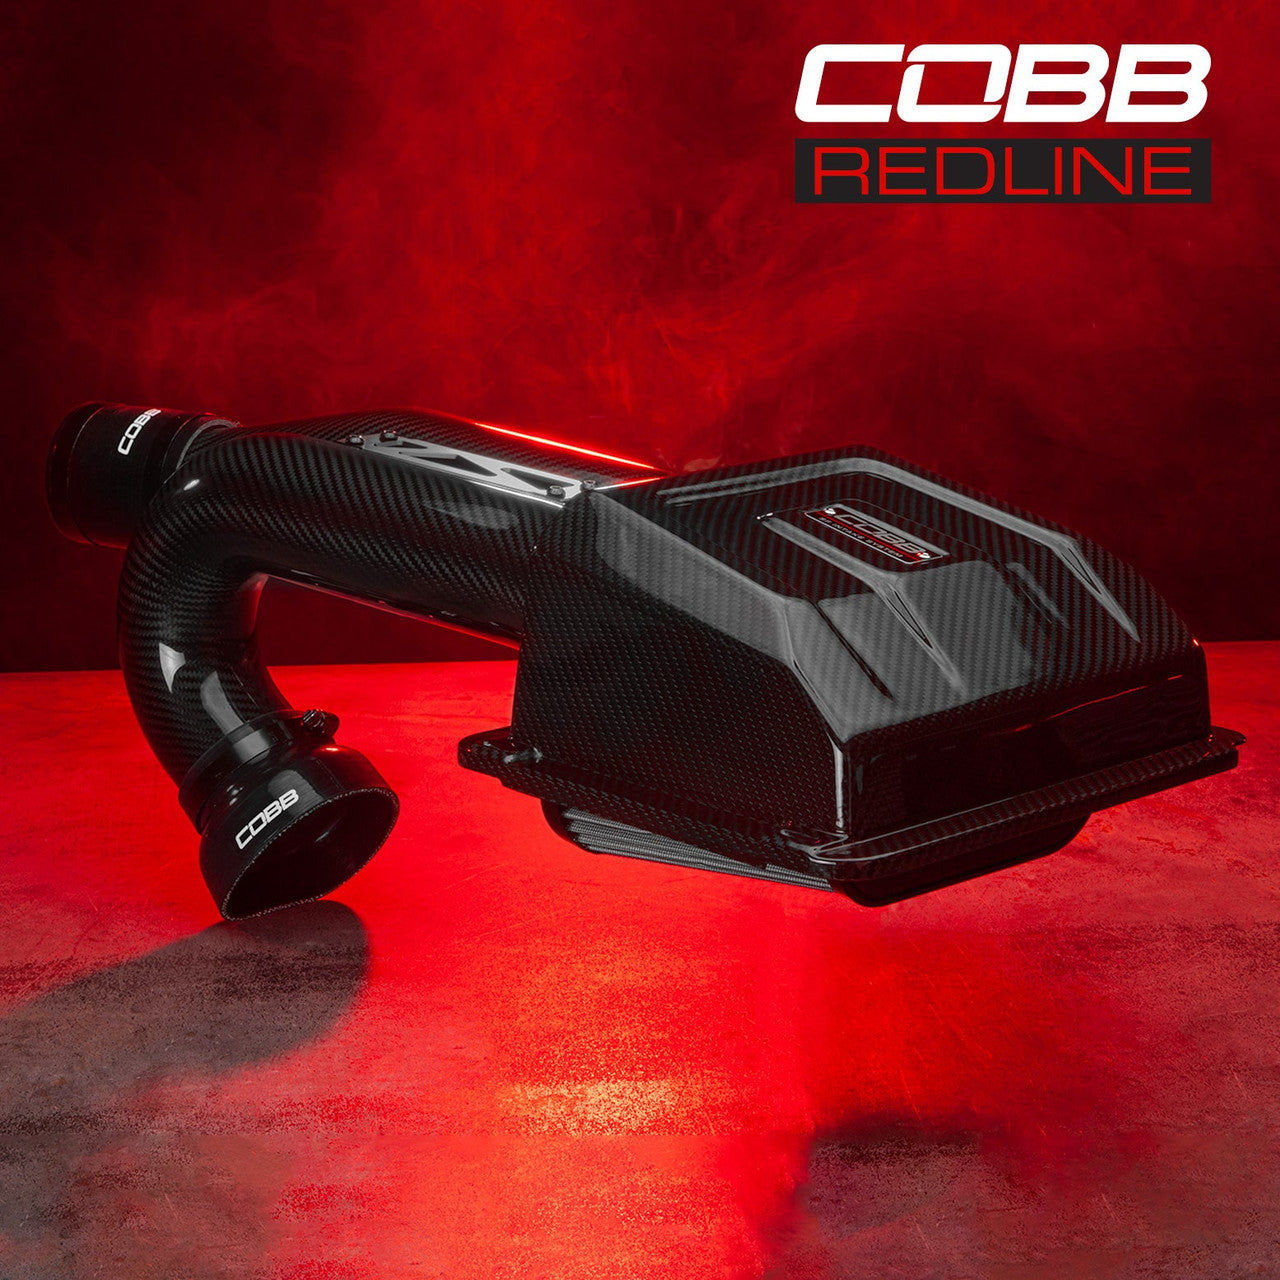 COBB Stage 2 Power Package F-150 EcoBoost 3.5L 2020